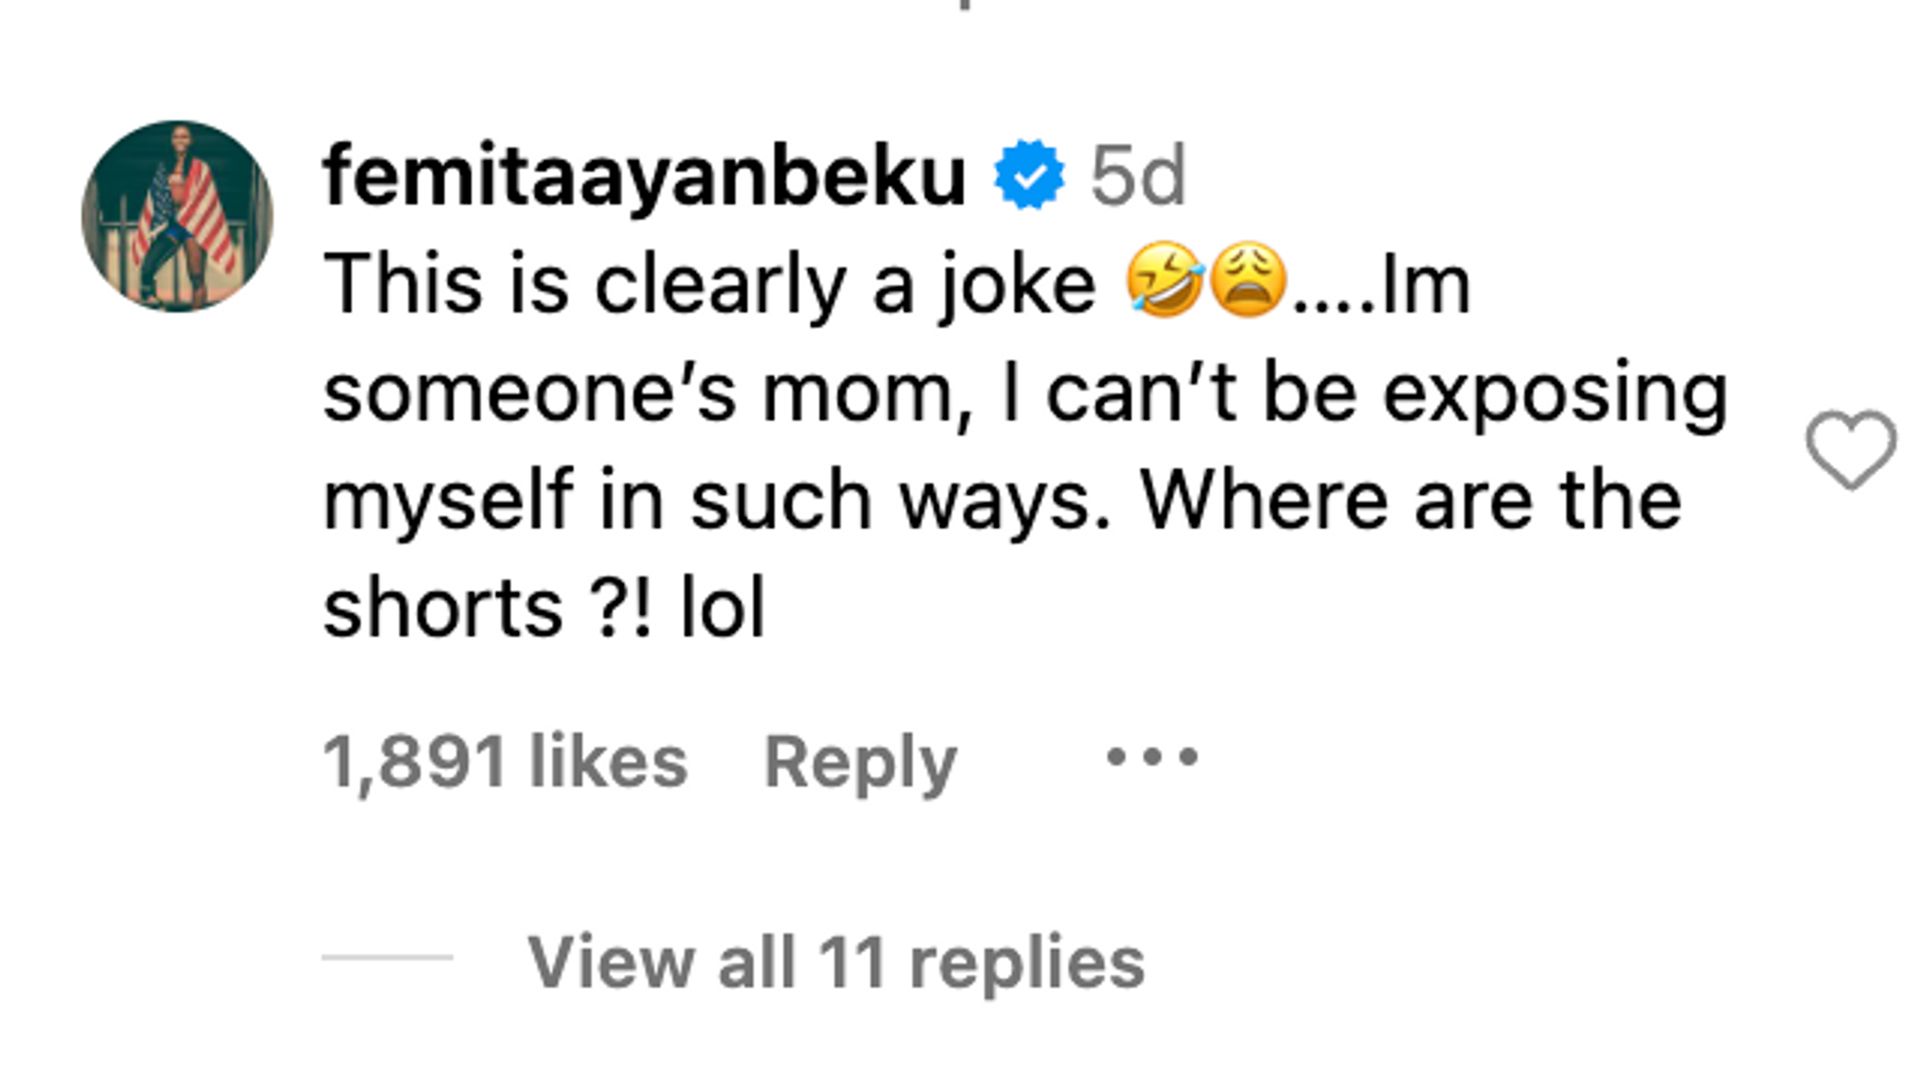 Paralympian Femita Ayanbeku stated facts in the comment section too